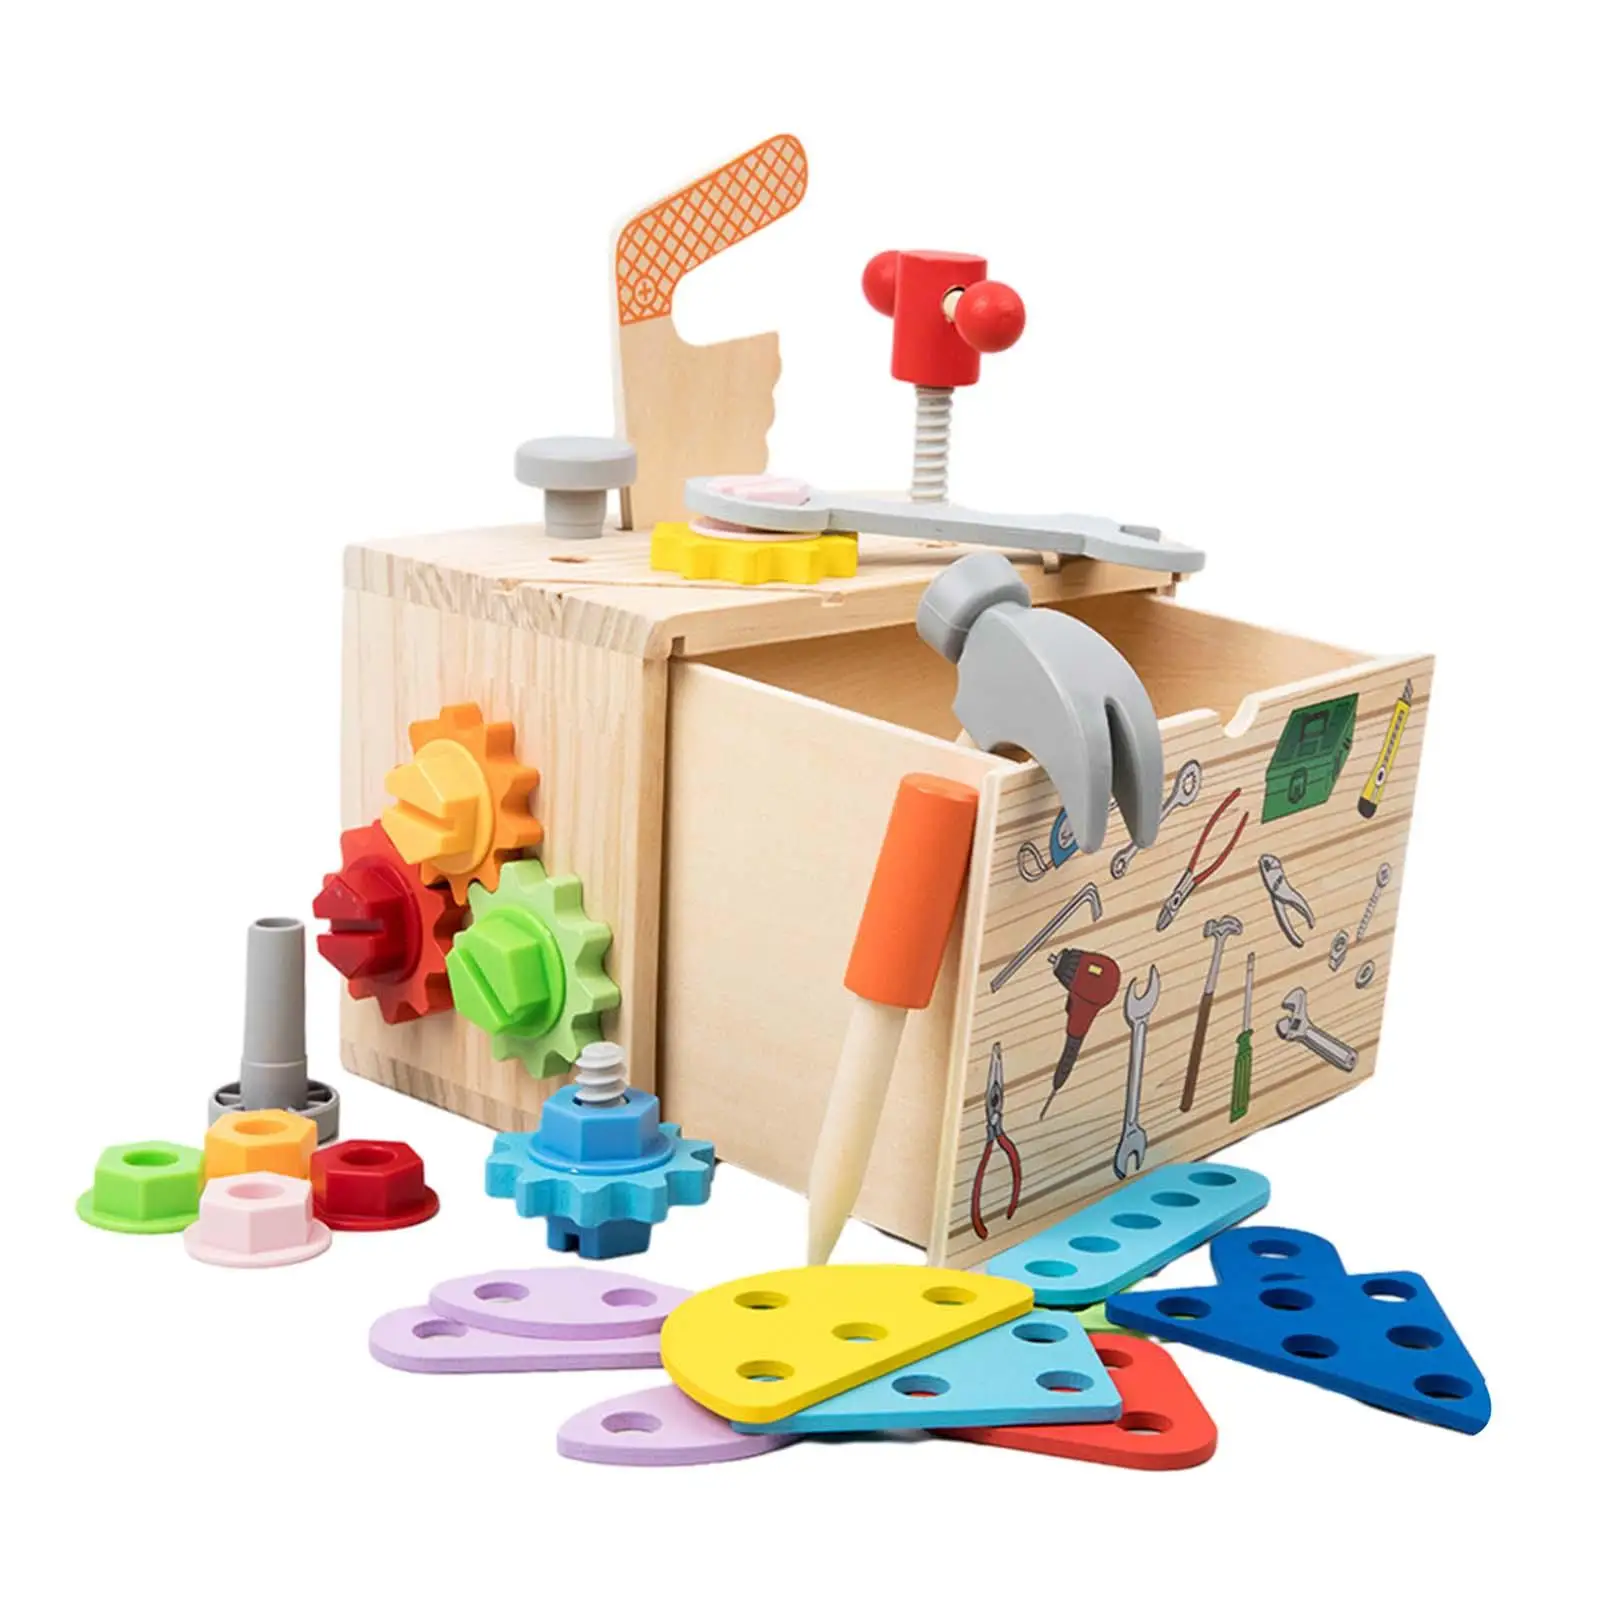 Wooden Toolbox Toy Develops Fine Motor Skills DIY Children Repair Play Tool Set for Festivals Christmas Holiday Ages 3+ Toddlers